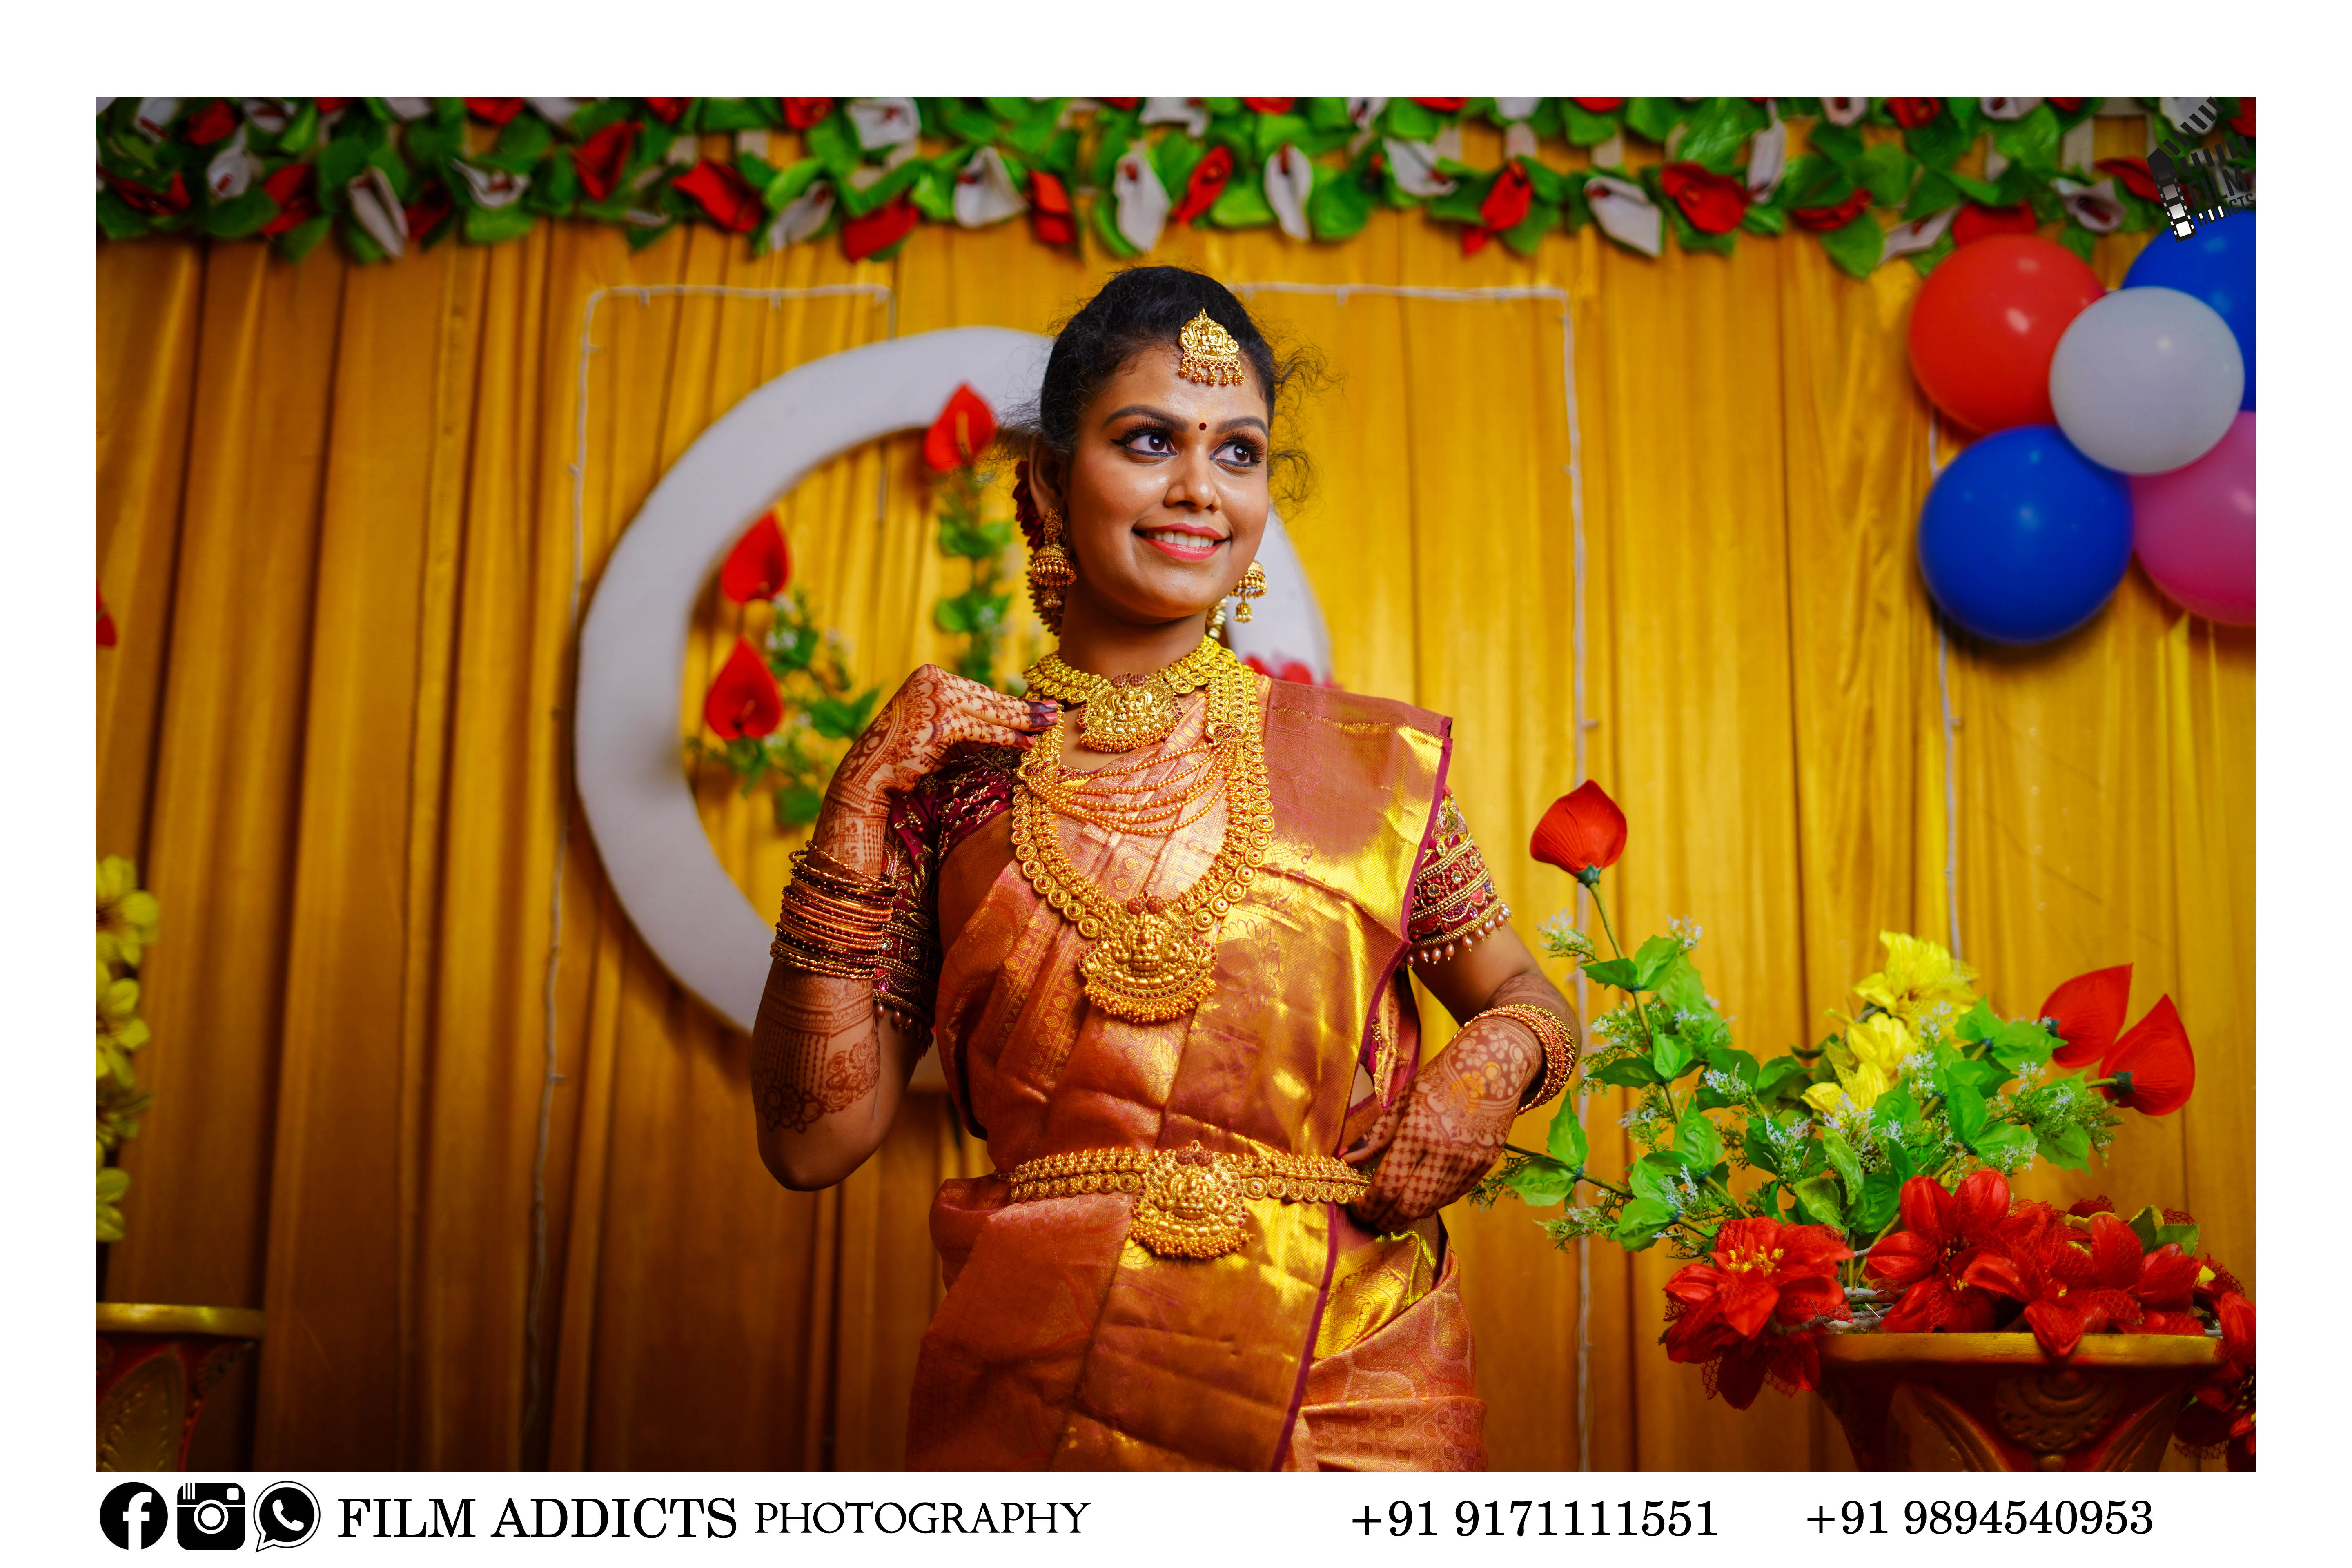 Best Puberty Photography in Karur-FilmAddicts Photography,Best wedding photographers in Karur,Best wedding photography in Karur,Best candid photographers in Karur,Best candid photography in Karur,Best marriage photographers in Karur,Best marriage photography in Karur,Best photographers in Karur,Best photography in Karur,Best wedding candid photography in Karur,Best wedding candid photographers in Karur,Best wedding video in Karur,Best wedding videographers in Karur,Best wedding videography in Karur,Best candid videographers in Karur,Best candid videography in Karur,Best marriage videographers in Karur,Best marriage videography in Karur,Best videographers in Karur,Best videography in Karur,Best wedding candid videography in Karur,Best wedding candid videographers in Karur,Best helicam operators in Karur,Best drone operators in Karur,Best wedding studio in Karur,Best professional photographers in Karur,Best professional photography in Karur,No.1 wedding photographers in Karur,No.1 wedding photography in Karur,Karur wedding photographers,Karur wedding photography,Karur wedding videos,Best candid videos in Karur,Best candid photos in Karur,Best helicam operators photography in Karur,Best helicam operator photographers in Karur,Best outdoor videography in Karur,Best professional wedding photography in Karur,Best outdoor photography in Karur,Best outdoor photographers in Karur,Best drone operators photographers in Karur,Best wedding candid videography in Karur,tamilnadu wedding photography, tamilnadu.